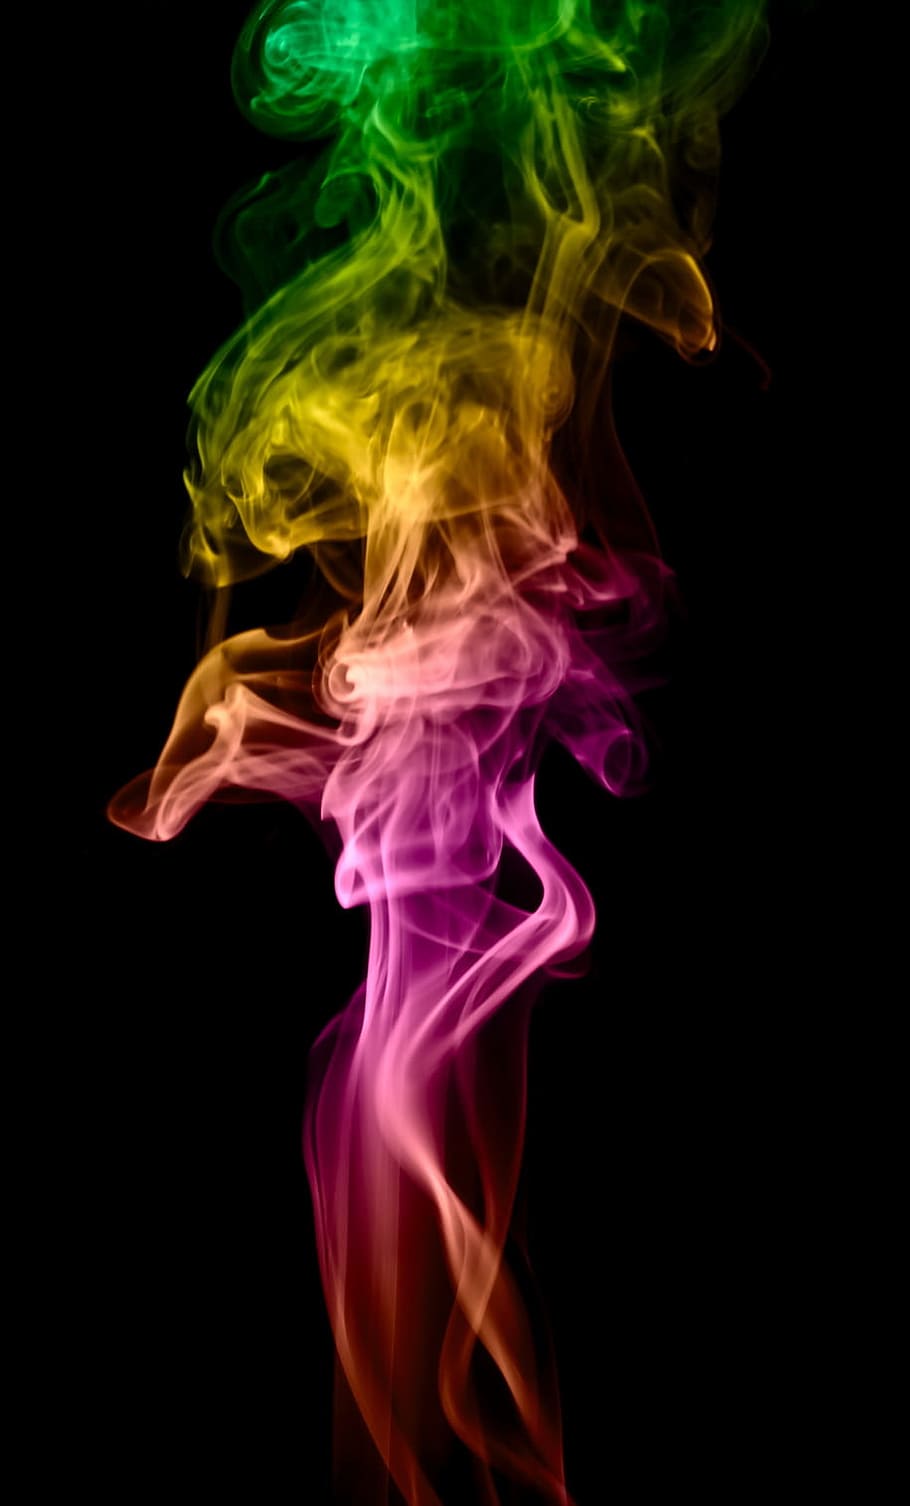 aromatherapy, background, color, smell, smoke, black background, studio shot, motion, indoors, smoke - physical structure